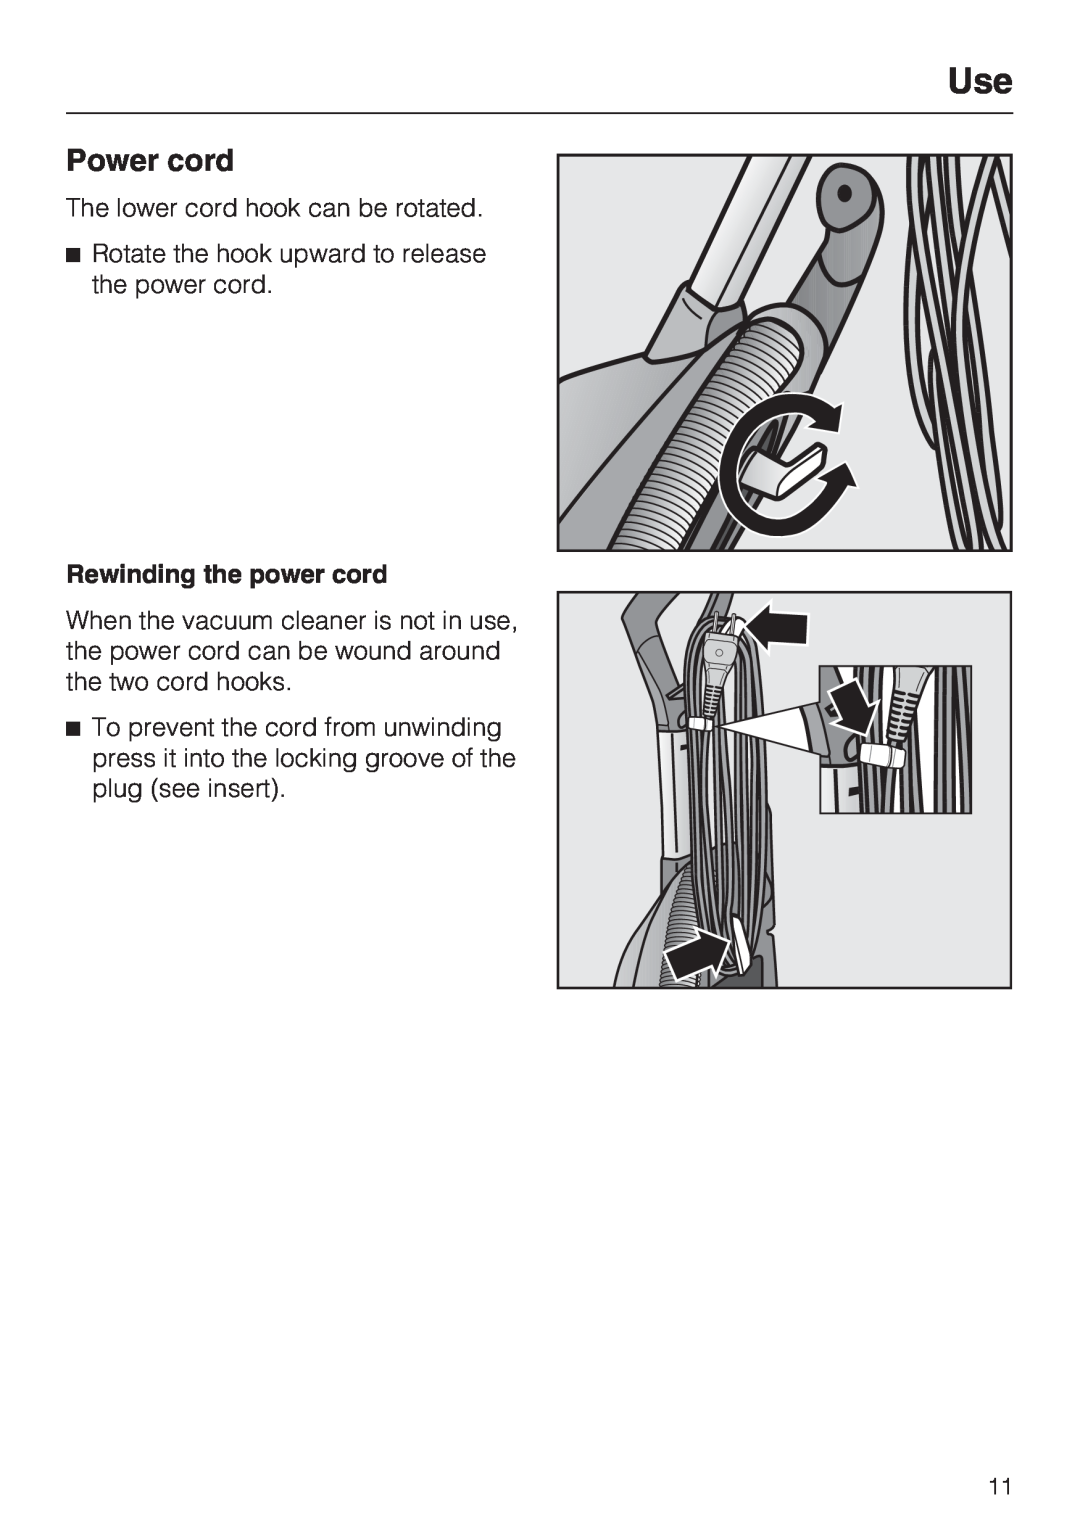 Miele S 7000 operating instructions Power cord, Rewinding the power cord 